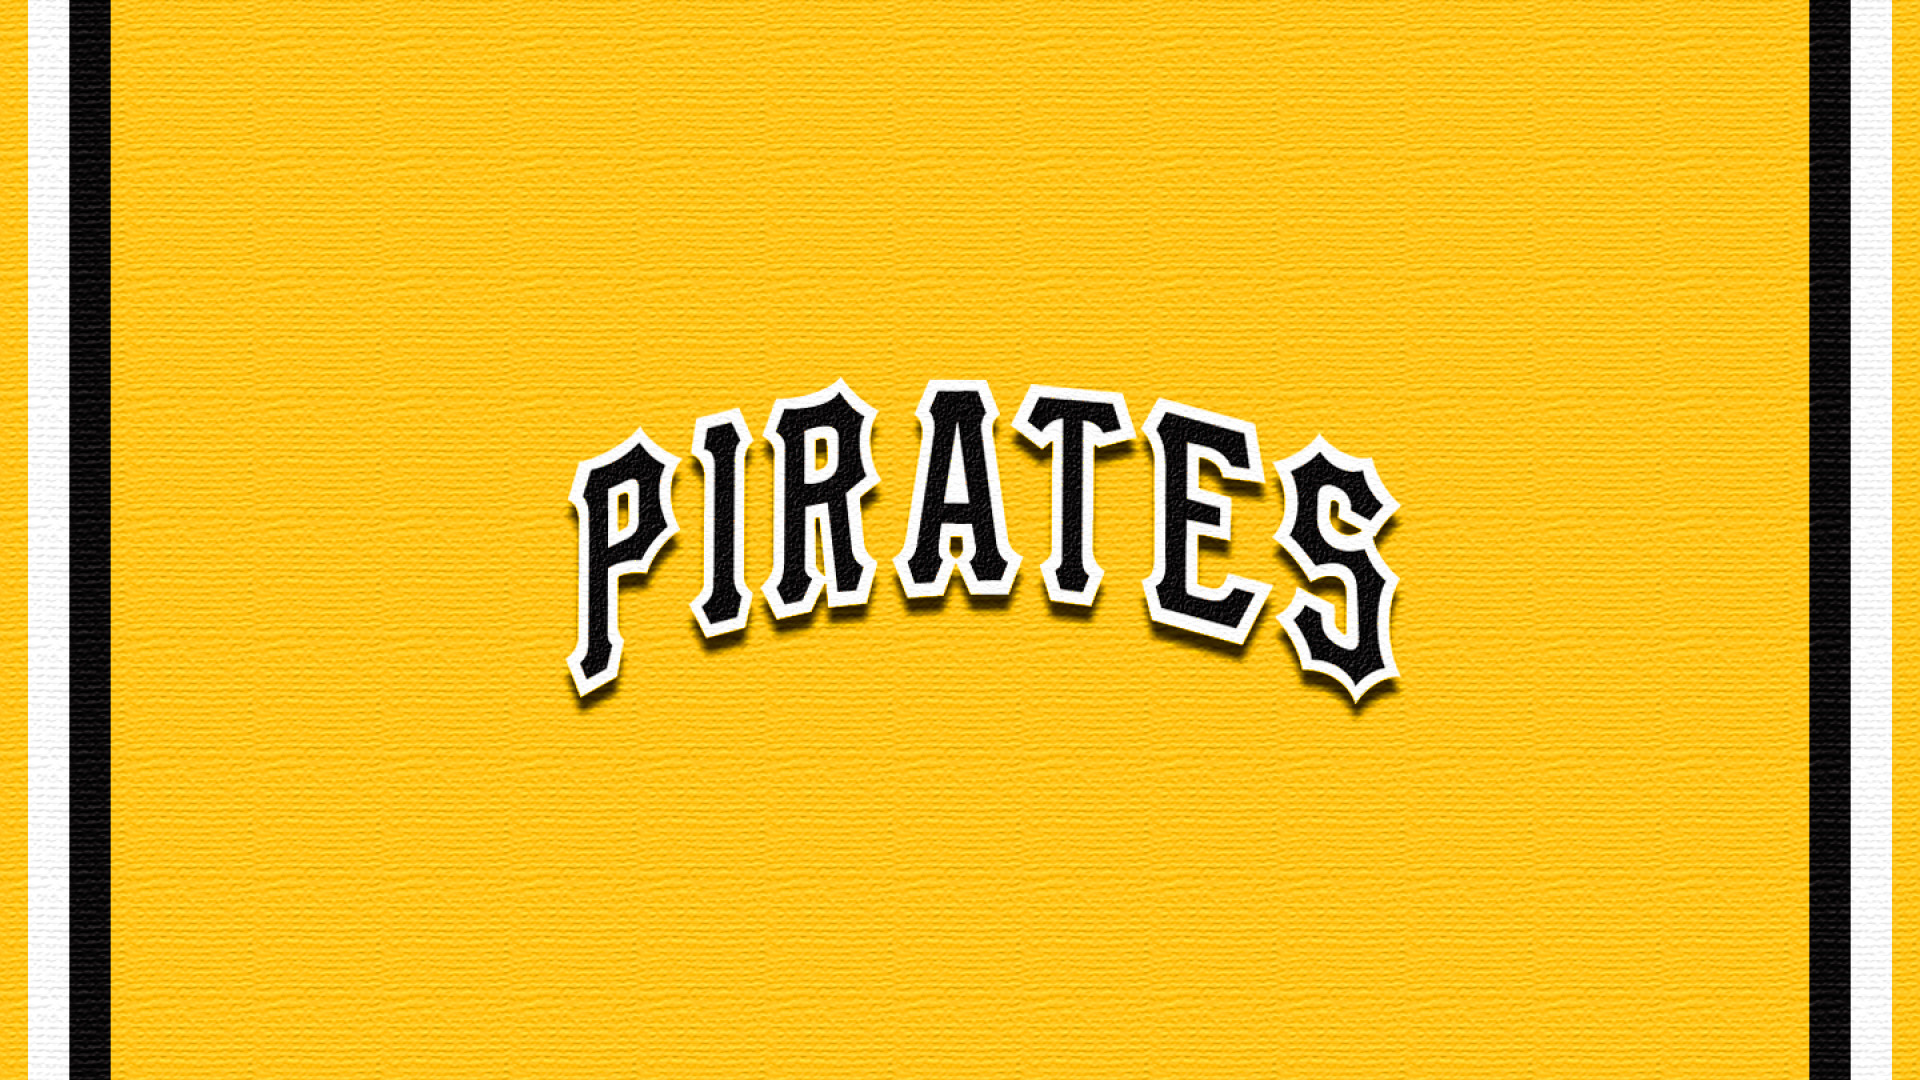 1920x1080 Pittsburgh Pirates HD Wallpaper | HD Wallpapers, HD Backgrounds